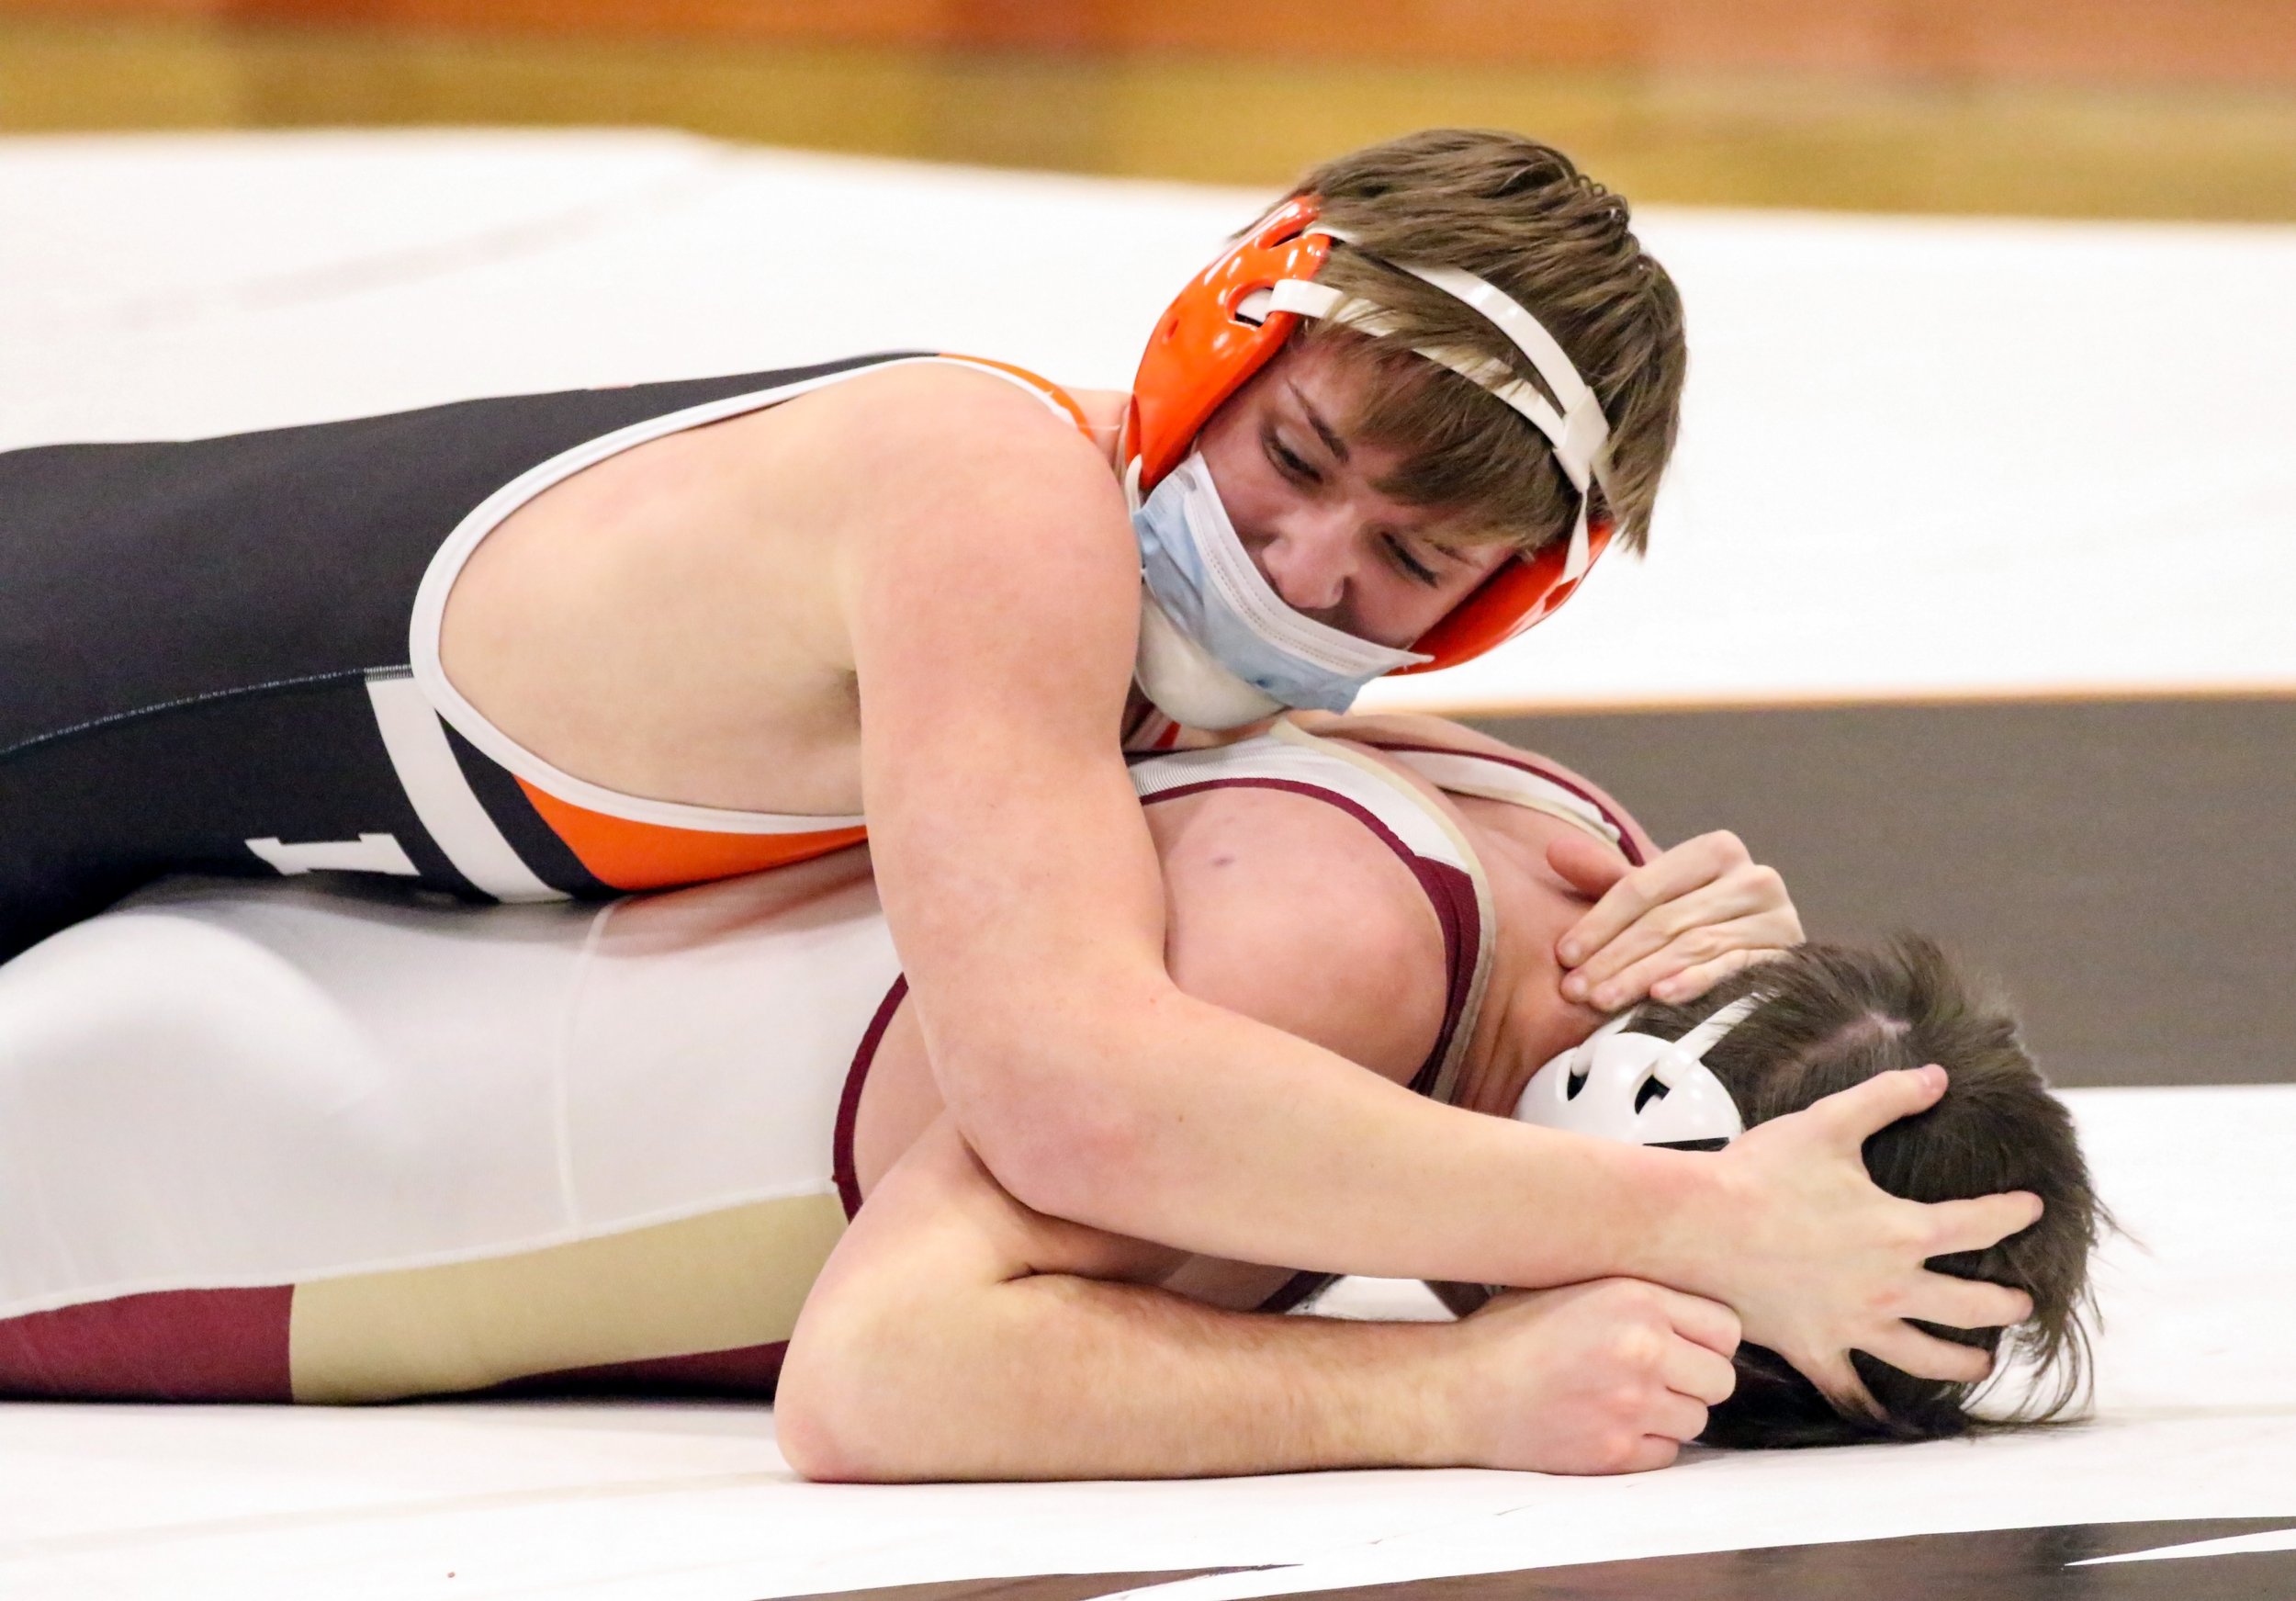  Wellsville’s Anthony Stamey, top, continues to work the upper hand against his opponent during his bout at 160 pounds in Tuesday night’s home match against Avoca/Prattsburgh/Hammondsport. [Chris Brooks/WellsvilleSports.com] 